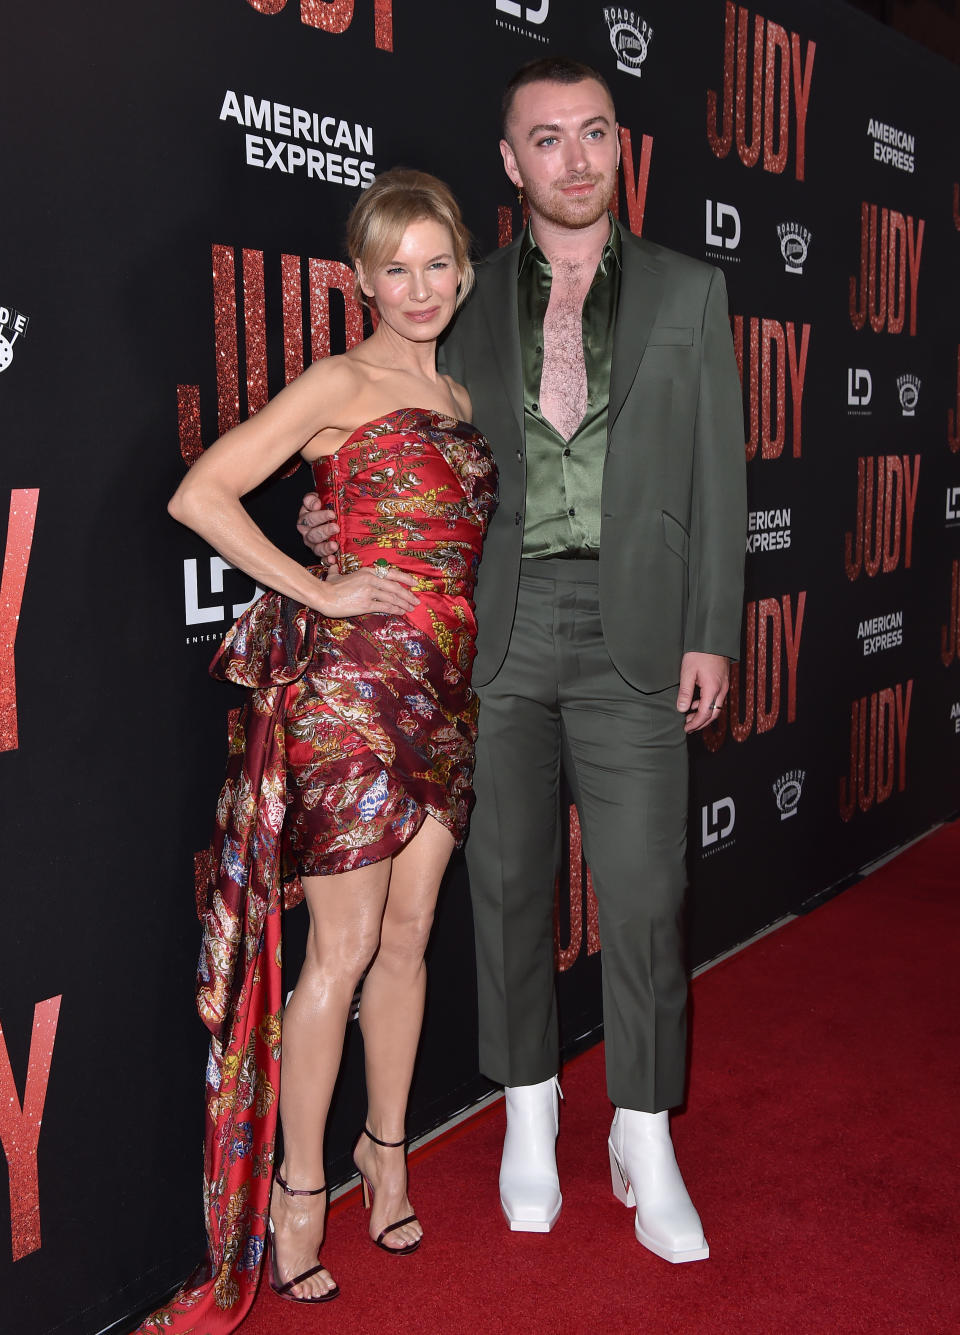 September 19, 2019: Renee Zellweger and Sam Smith attend the Judy premiere